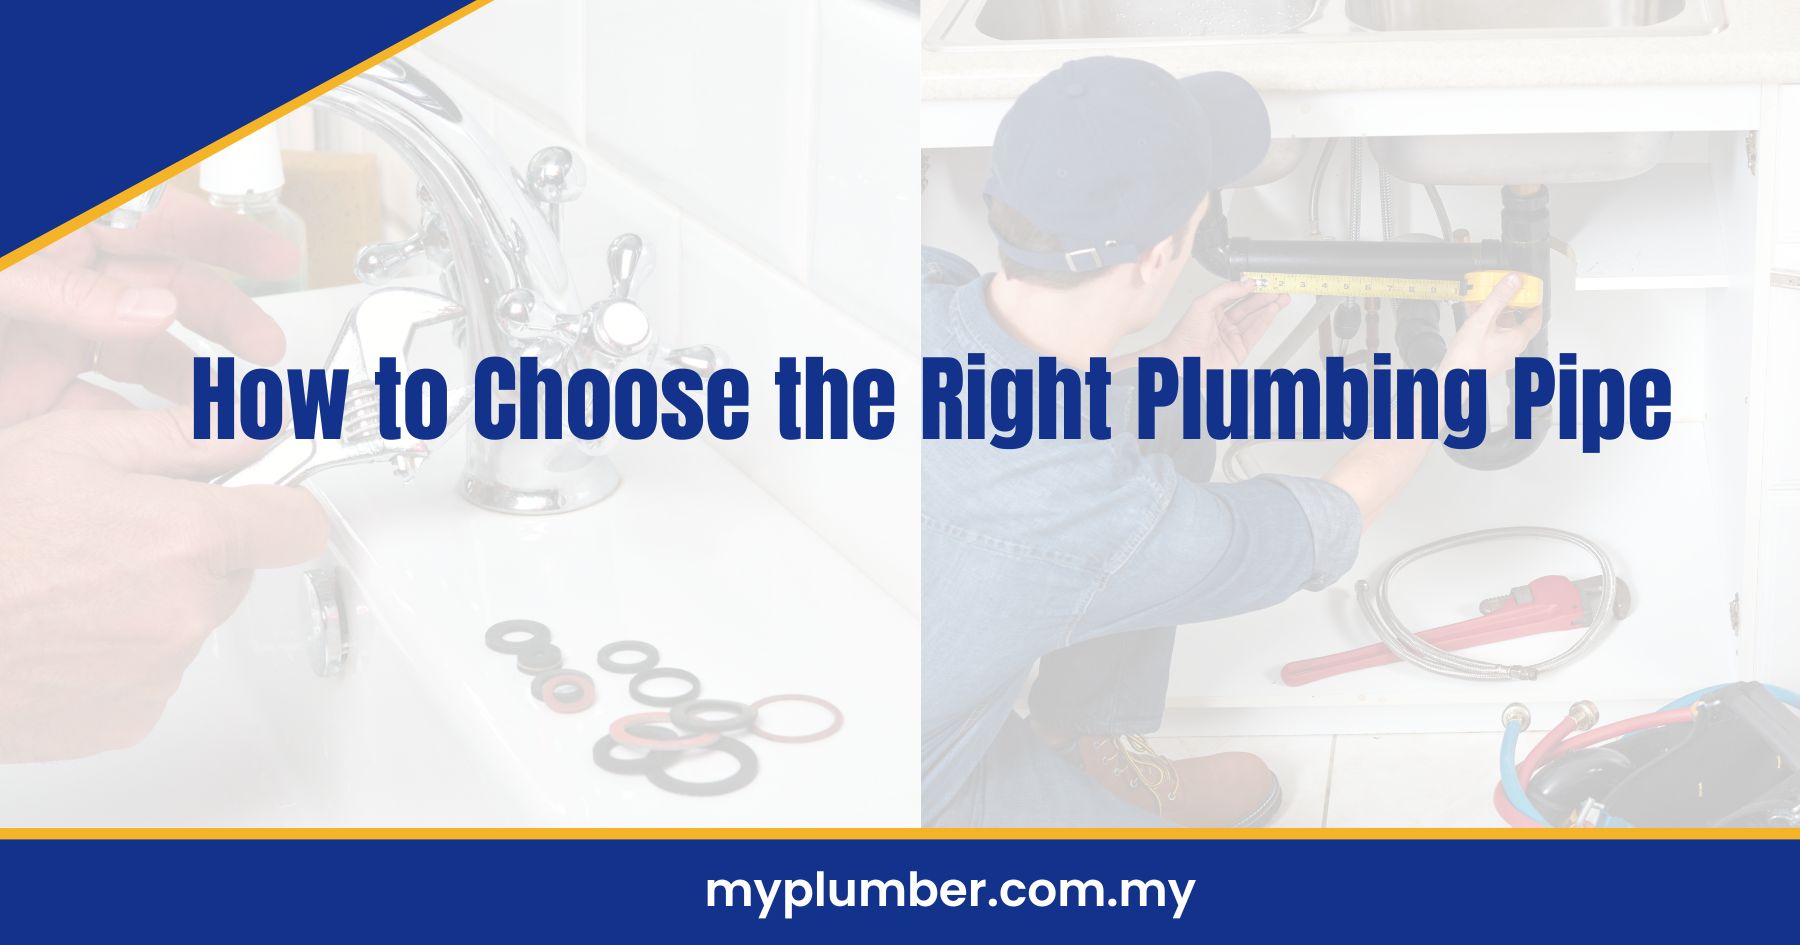 How to Choose the Right Plumbing Pipe